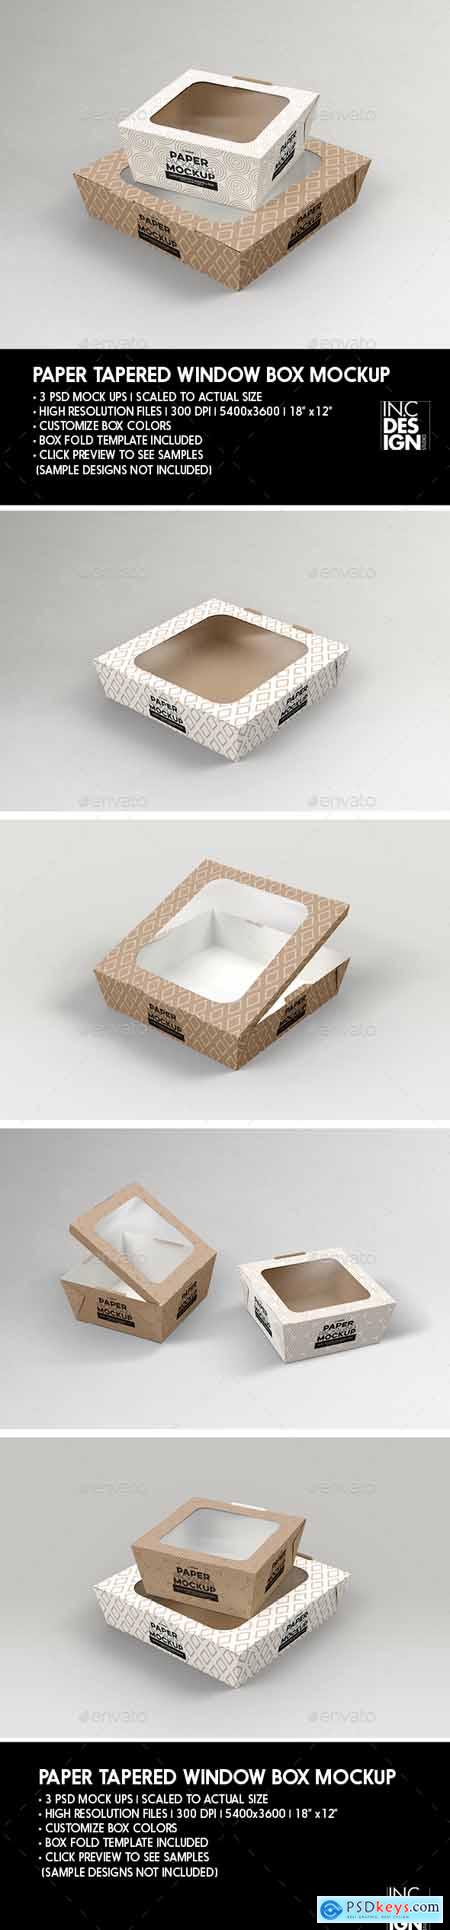 Download Graphicriver Paper Tapered Window Boxes Packaging Mockup ...